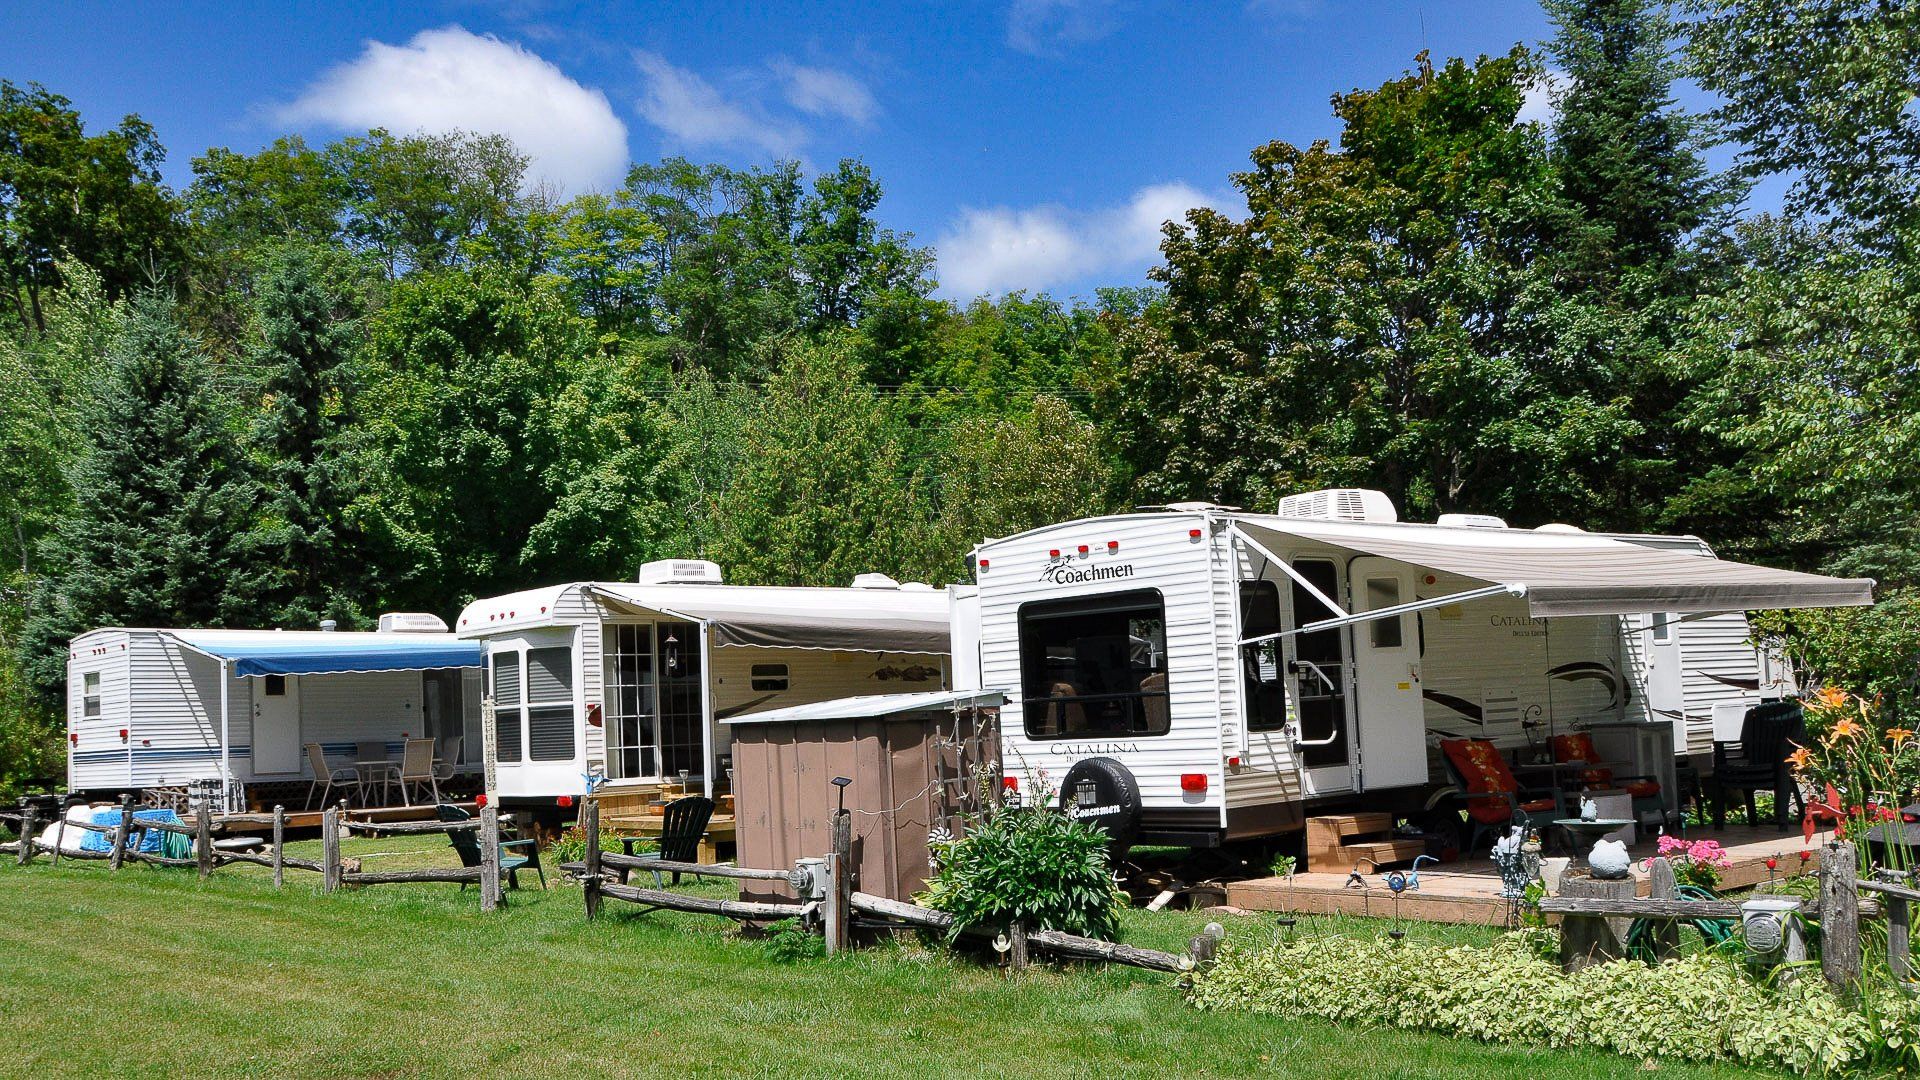 A group of rvs are parked in a grassy field.